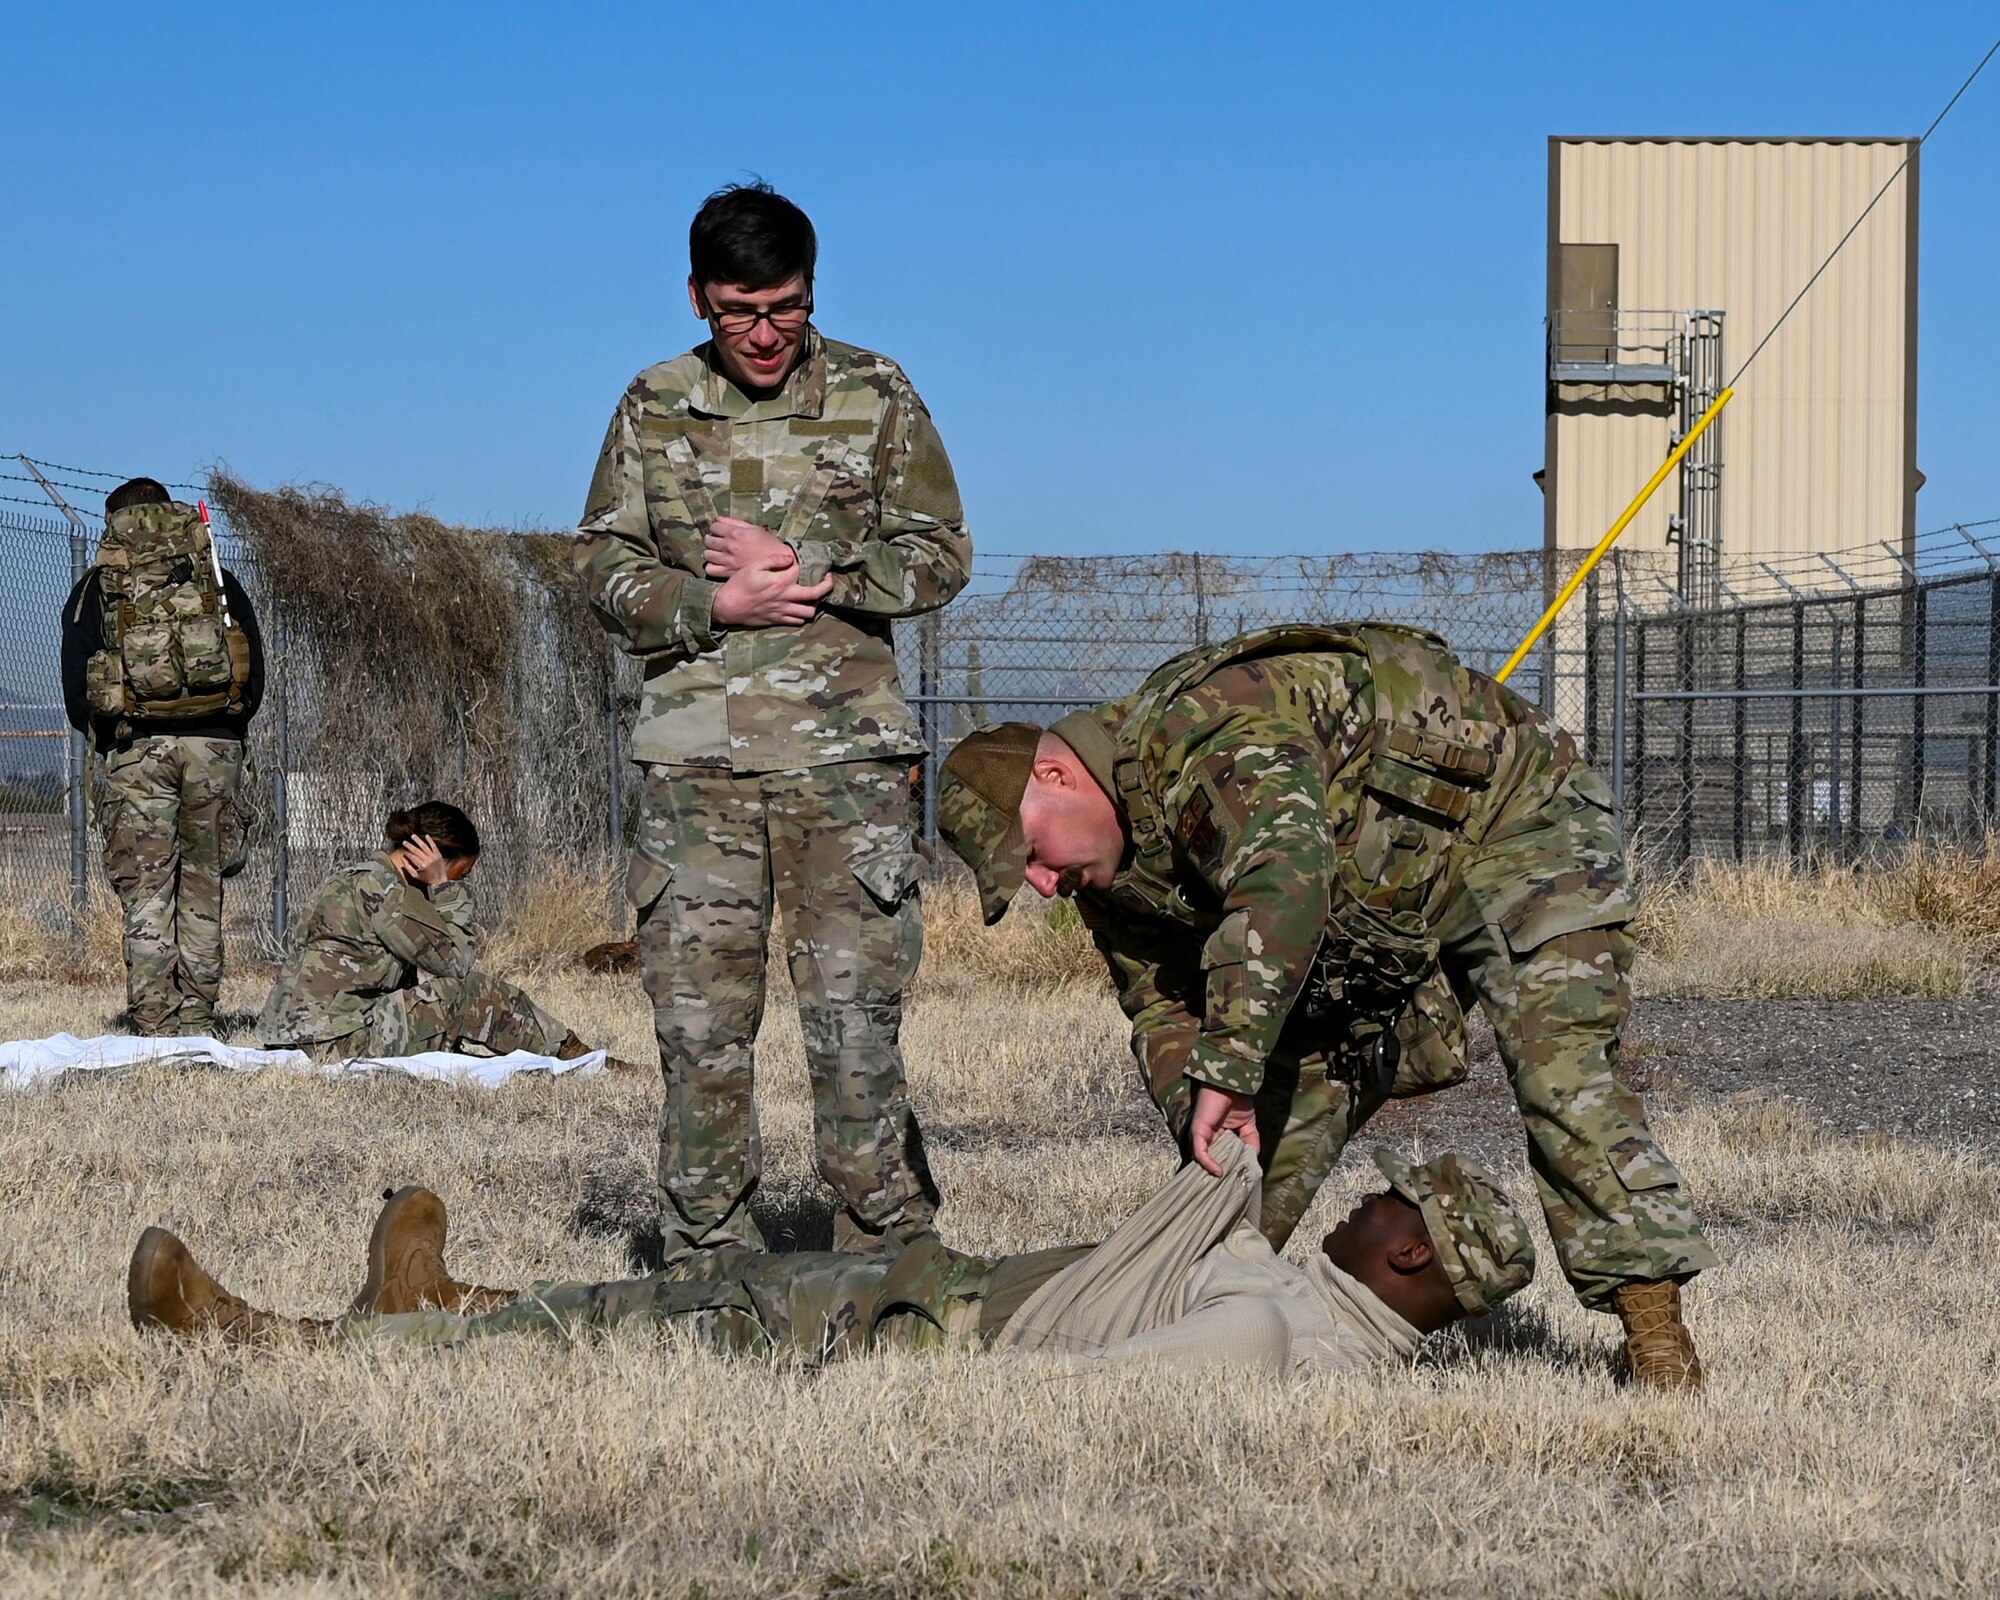 two Air Force Airmen provide medical care to a simulated victim outside in a dried grass area